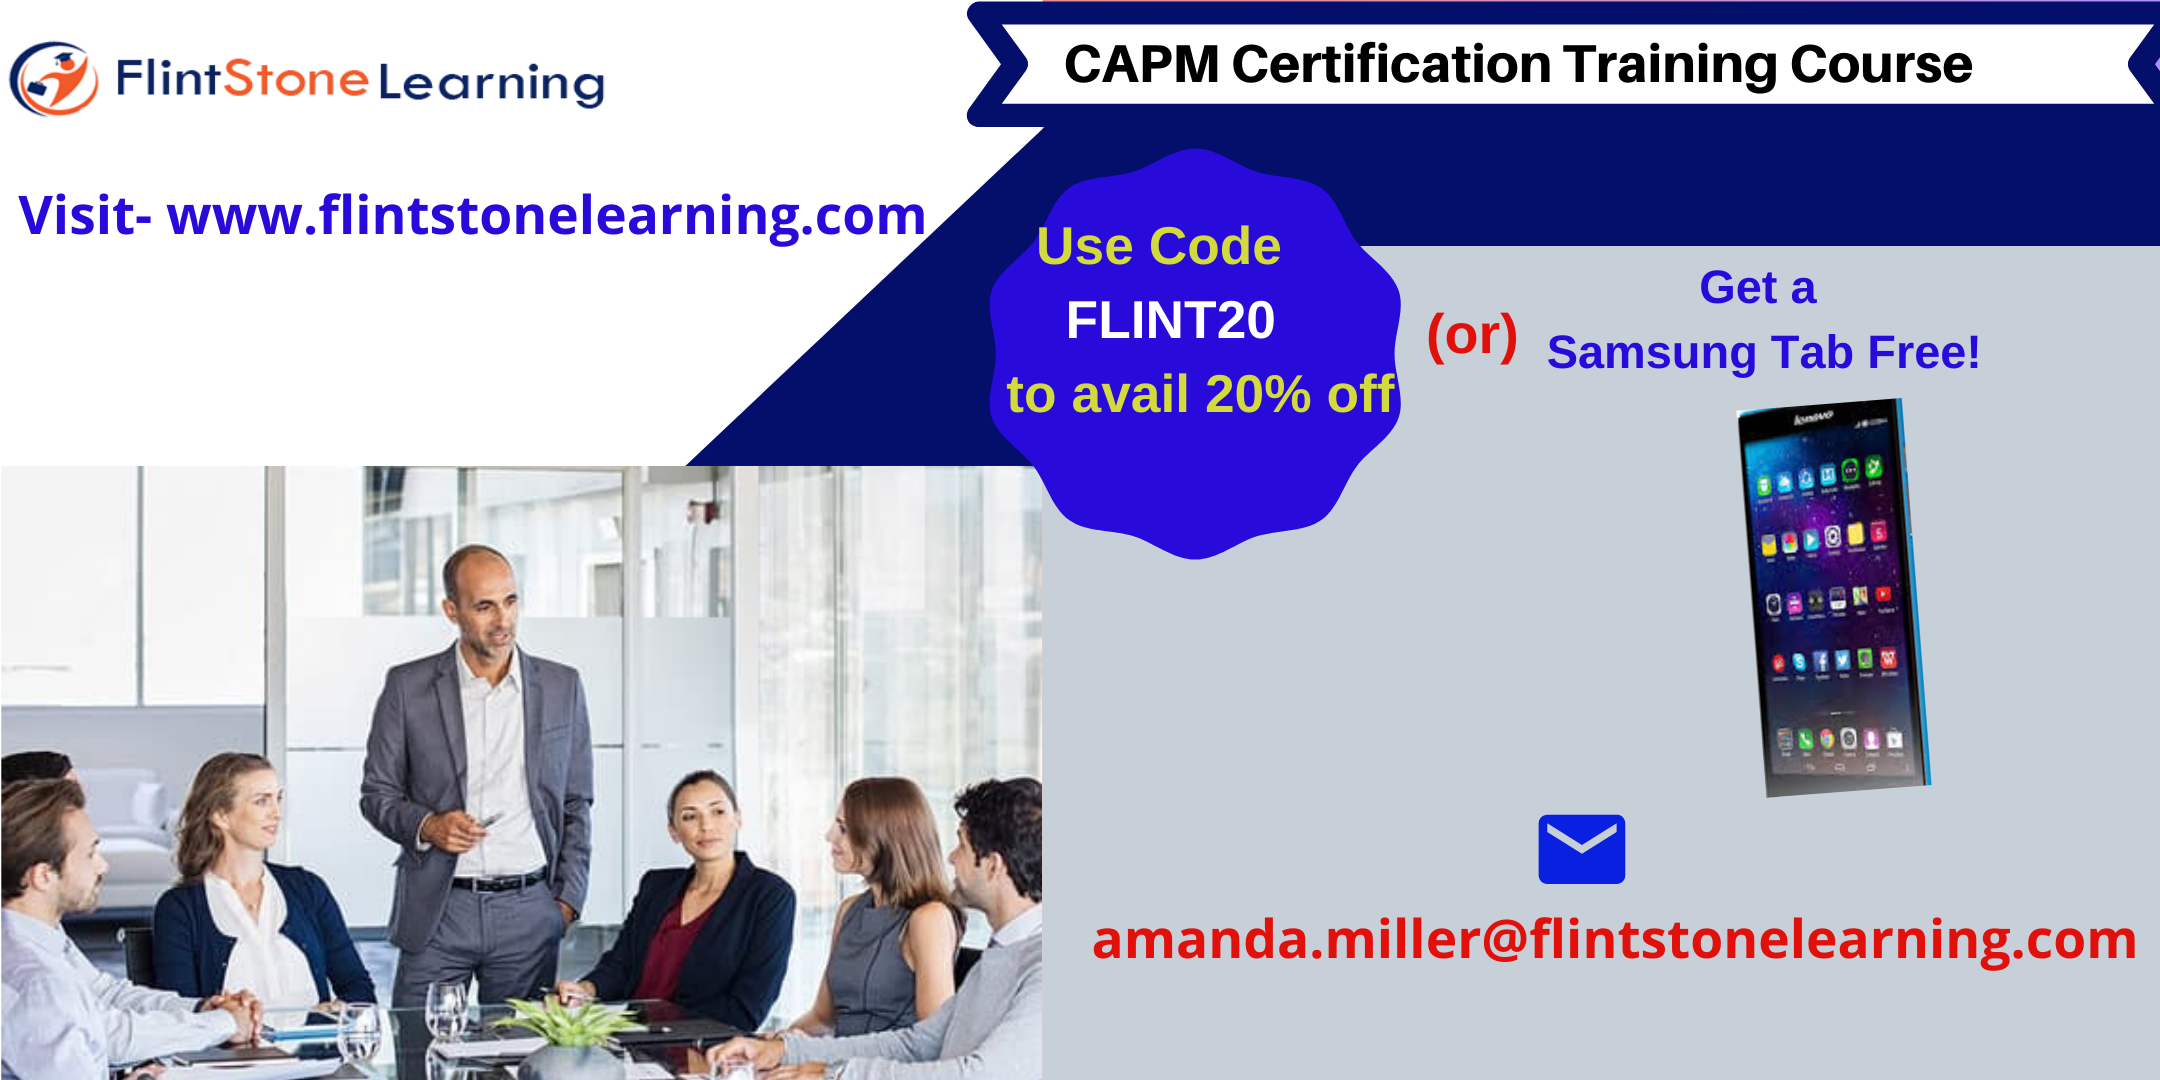 CAPM Certification Training Course in Pflugerville, TX